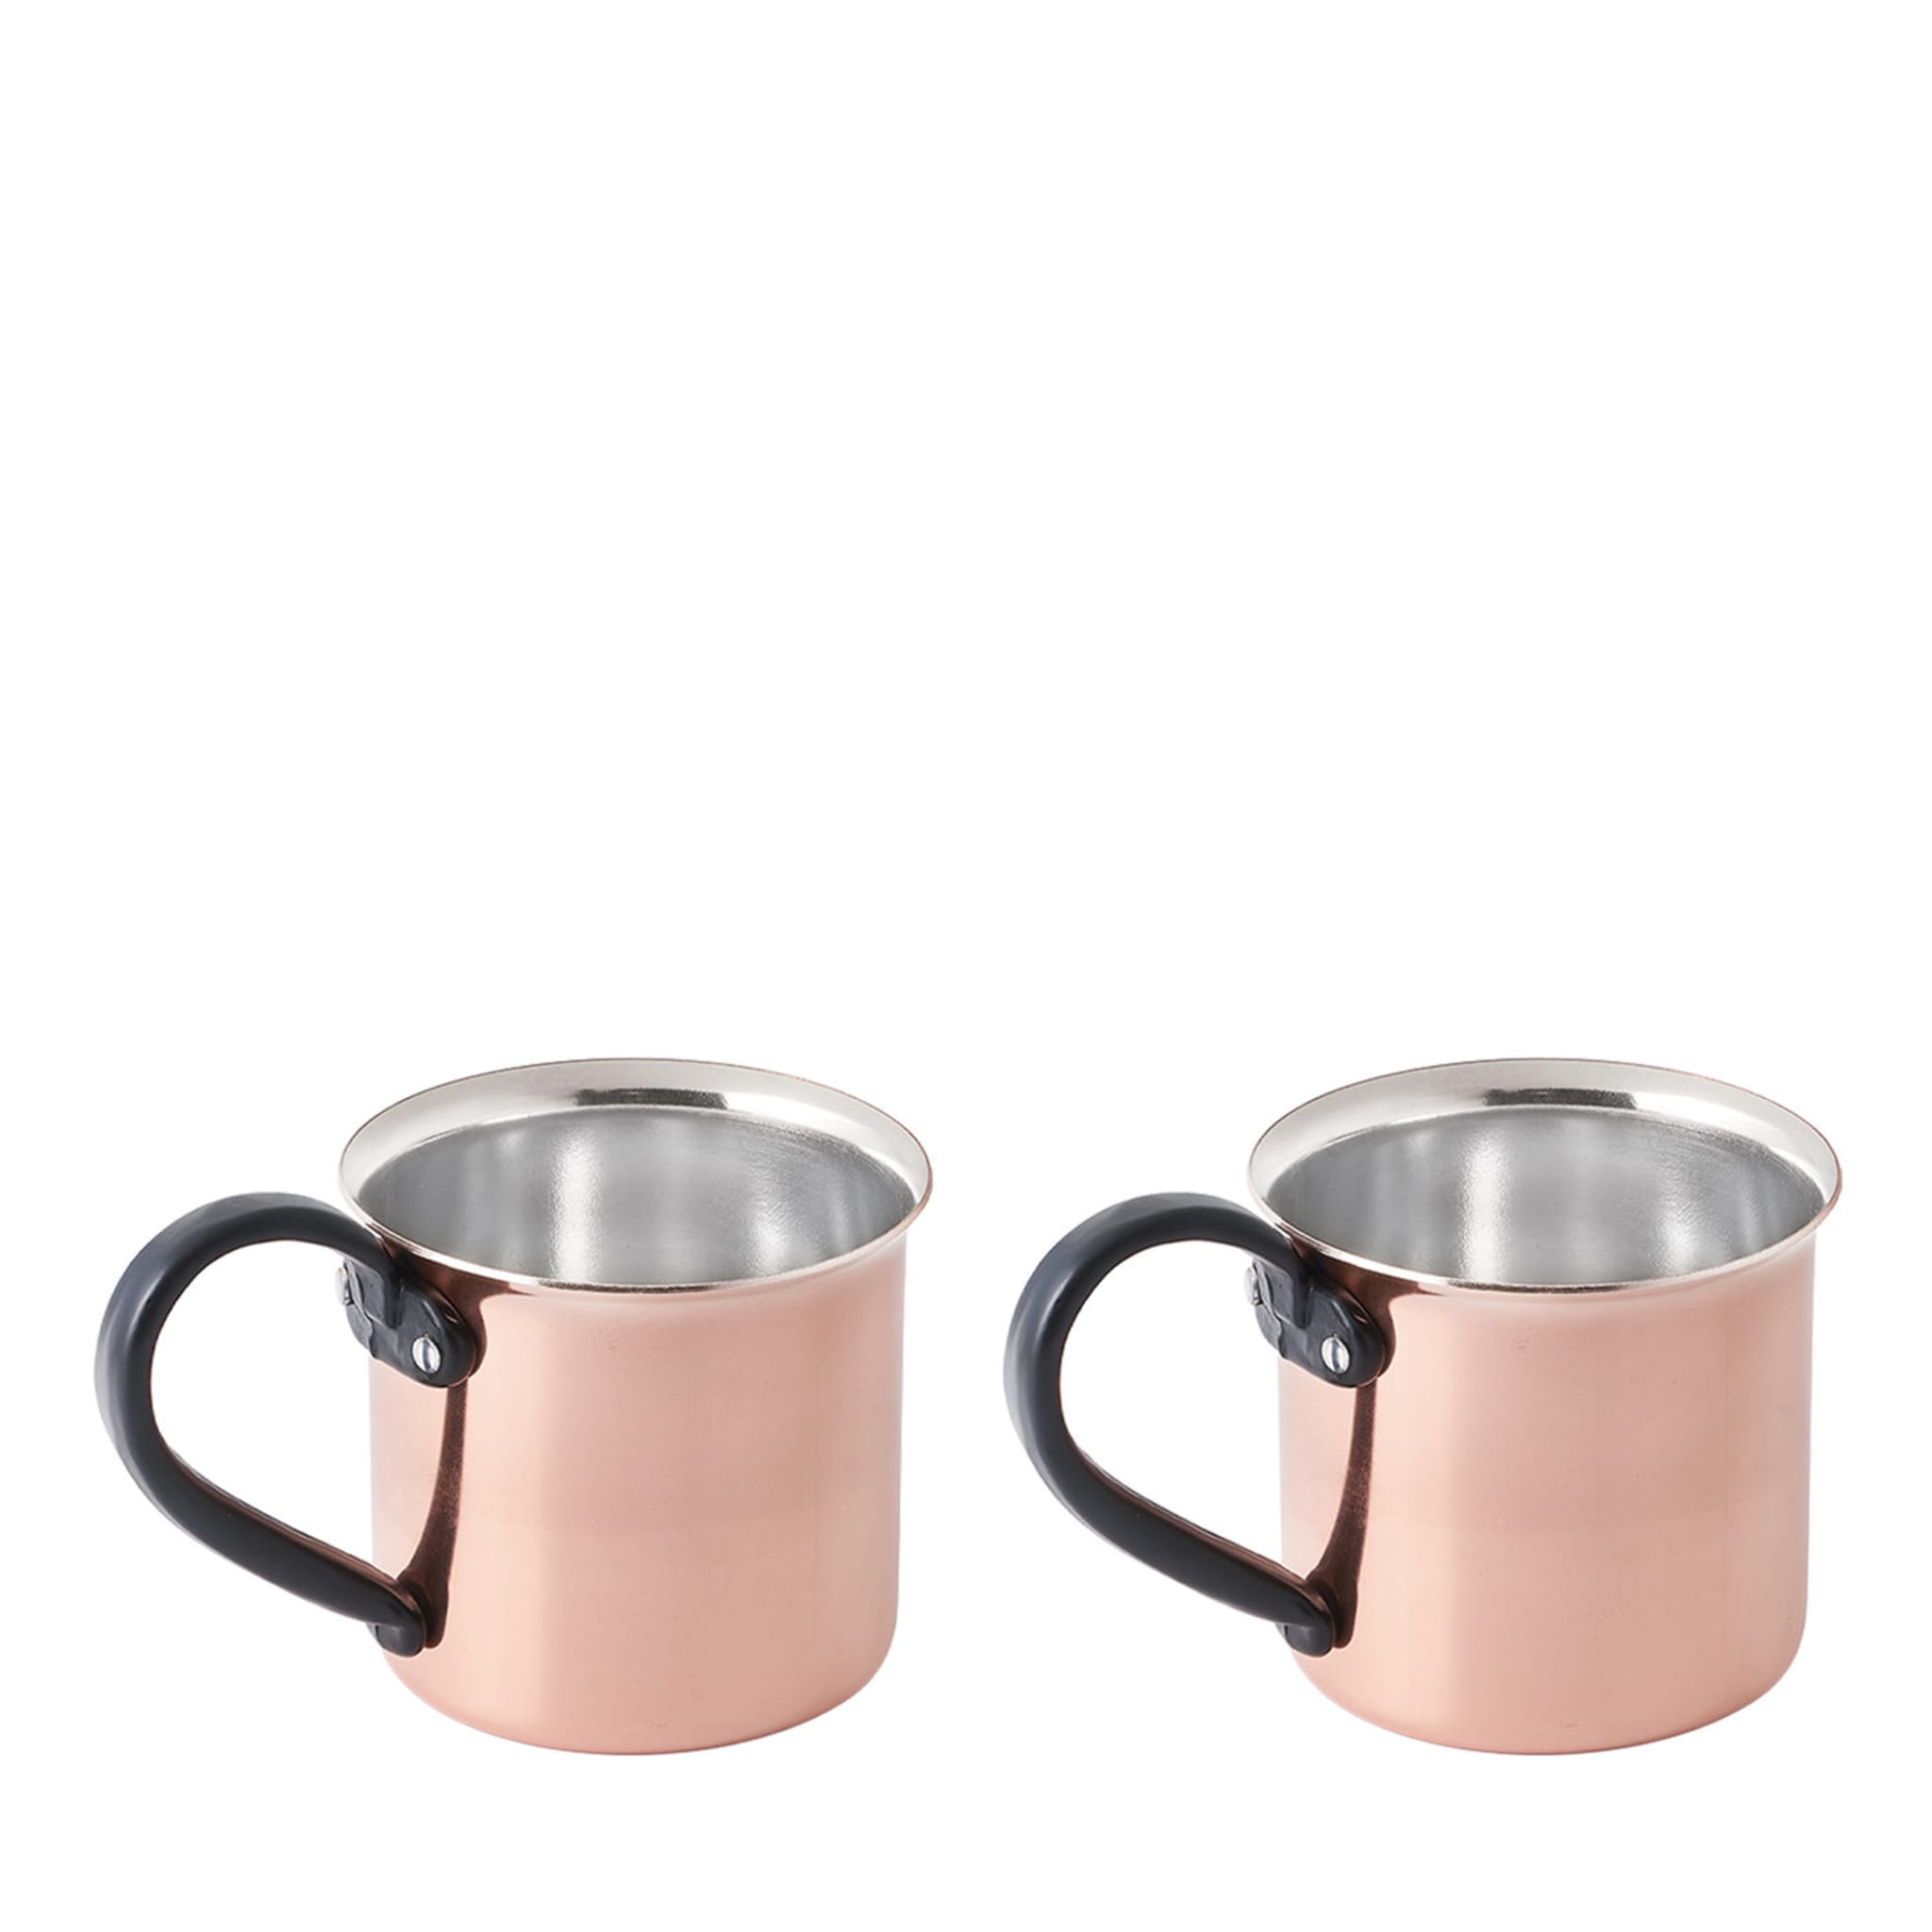 Set of 2 Copper Mugs with Black Handles - Alternative view 1